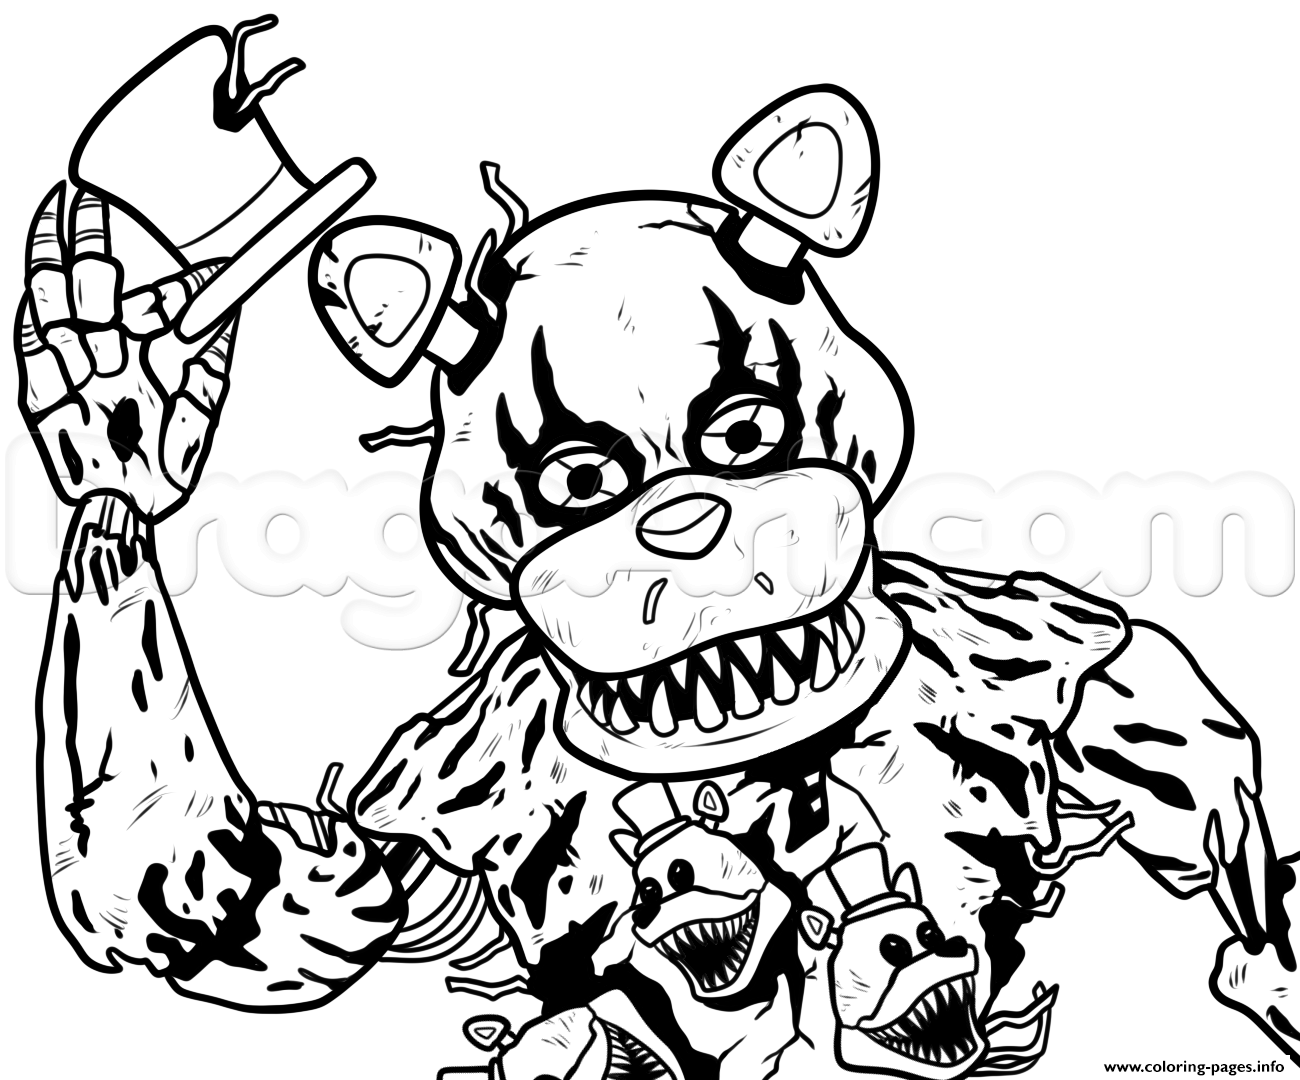 Print draw nightmare freddy fazbear five nights at freddys fnaf coloring pages